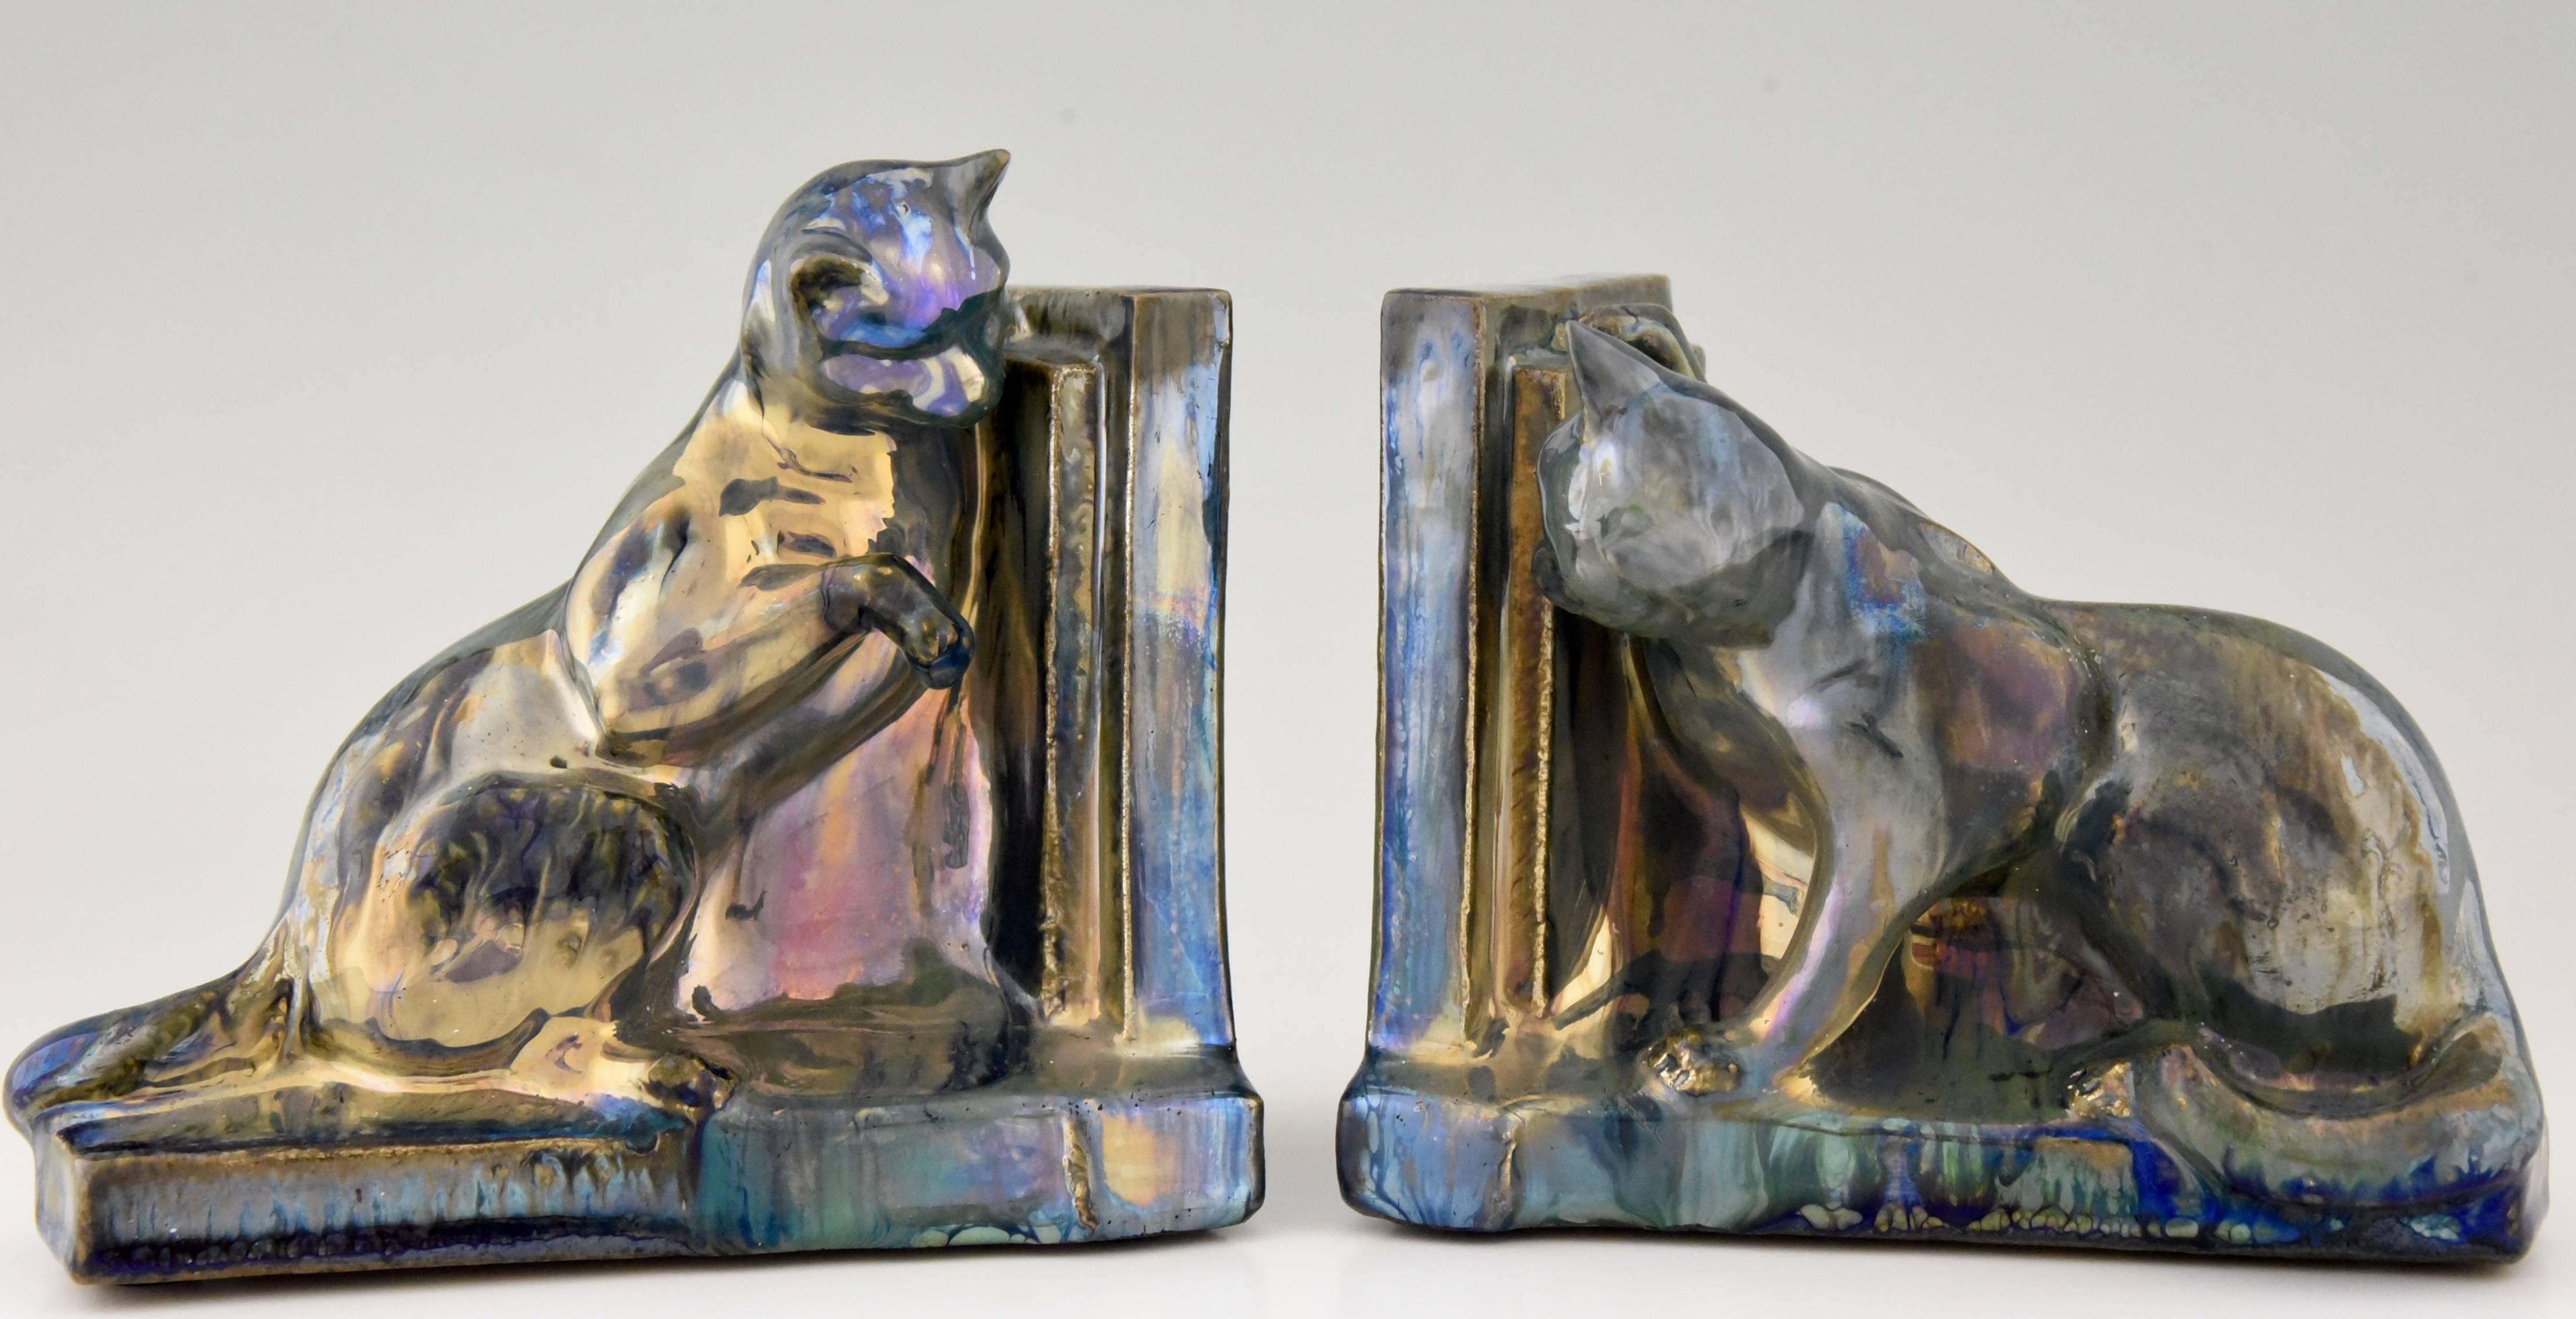 Lovely pair of ceramic cat bookends with iridescent glaze by A. Cytère for Rambervillers , Unis France  marked A. Schneider .

Artist / Maker:
A. Cytère Rambervillers.
Signature / Marks:
A. Cytère Rambervillers , Unis France , A.